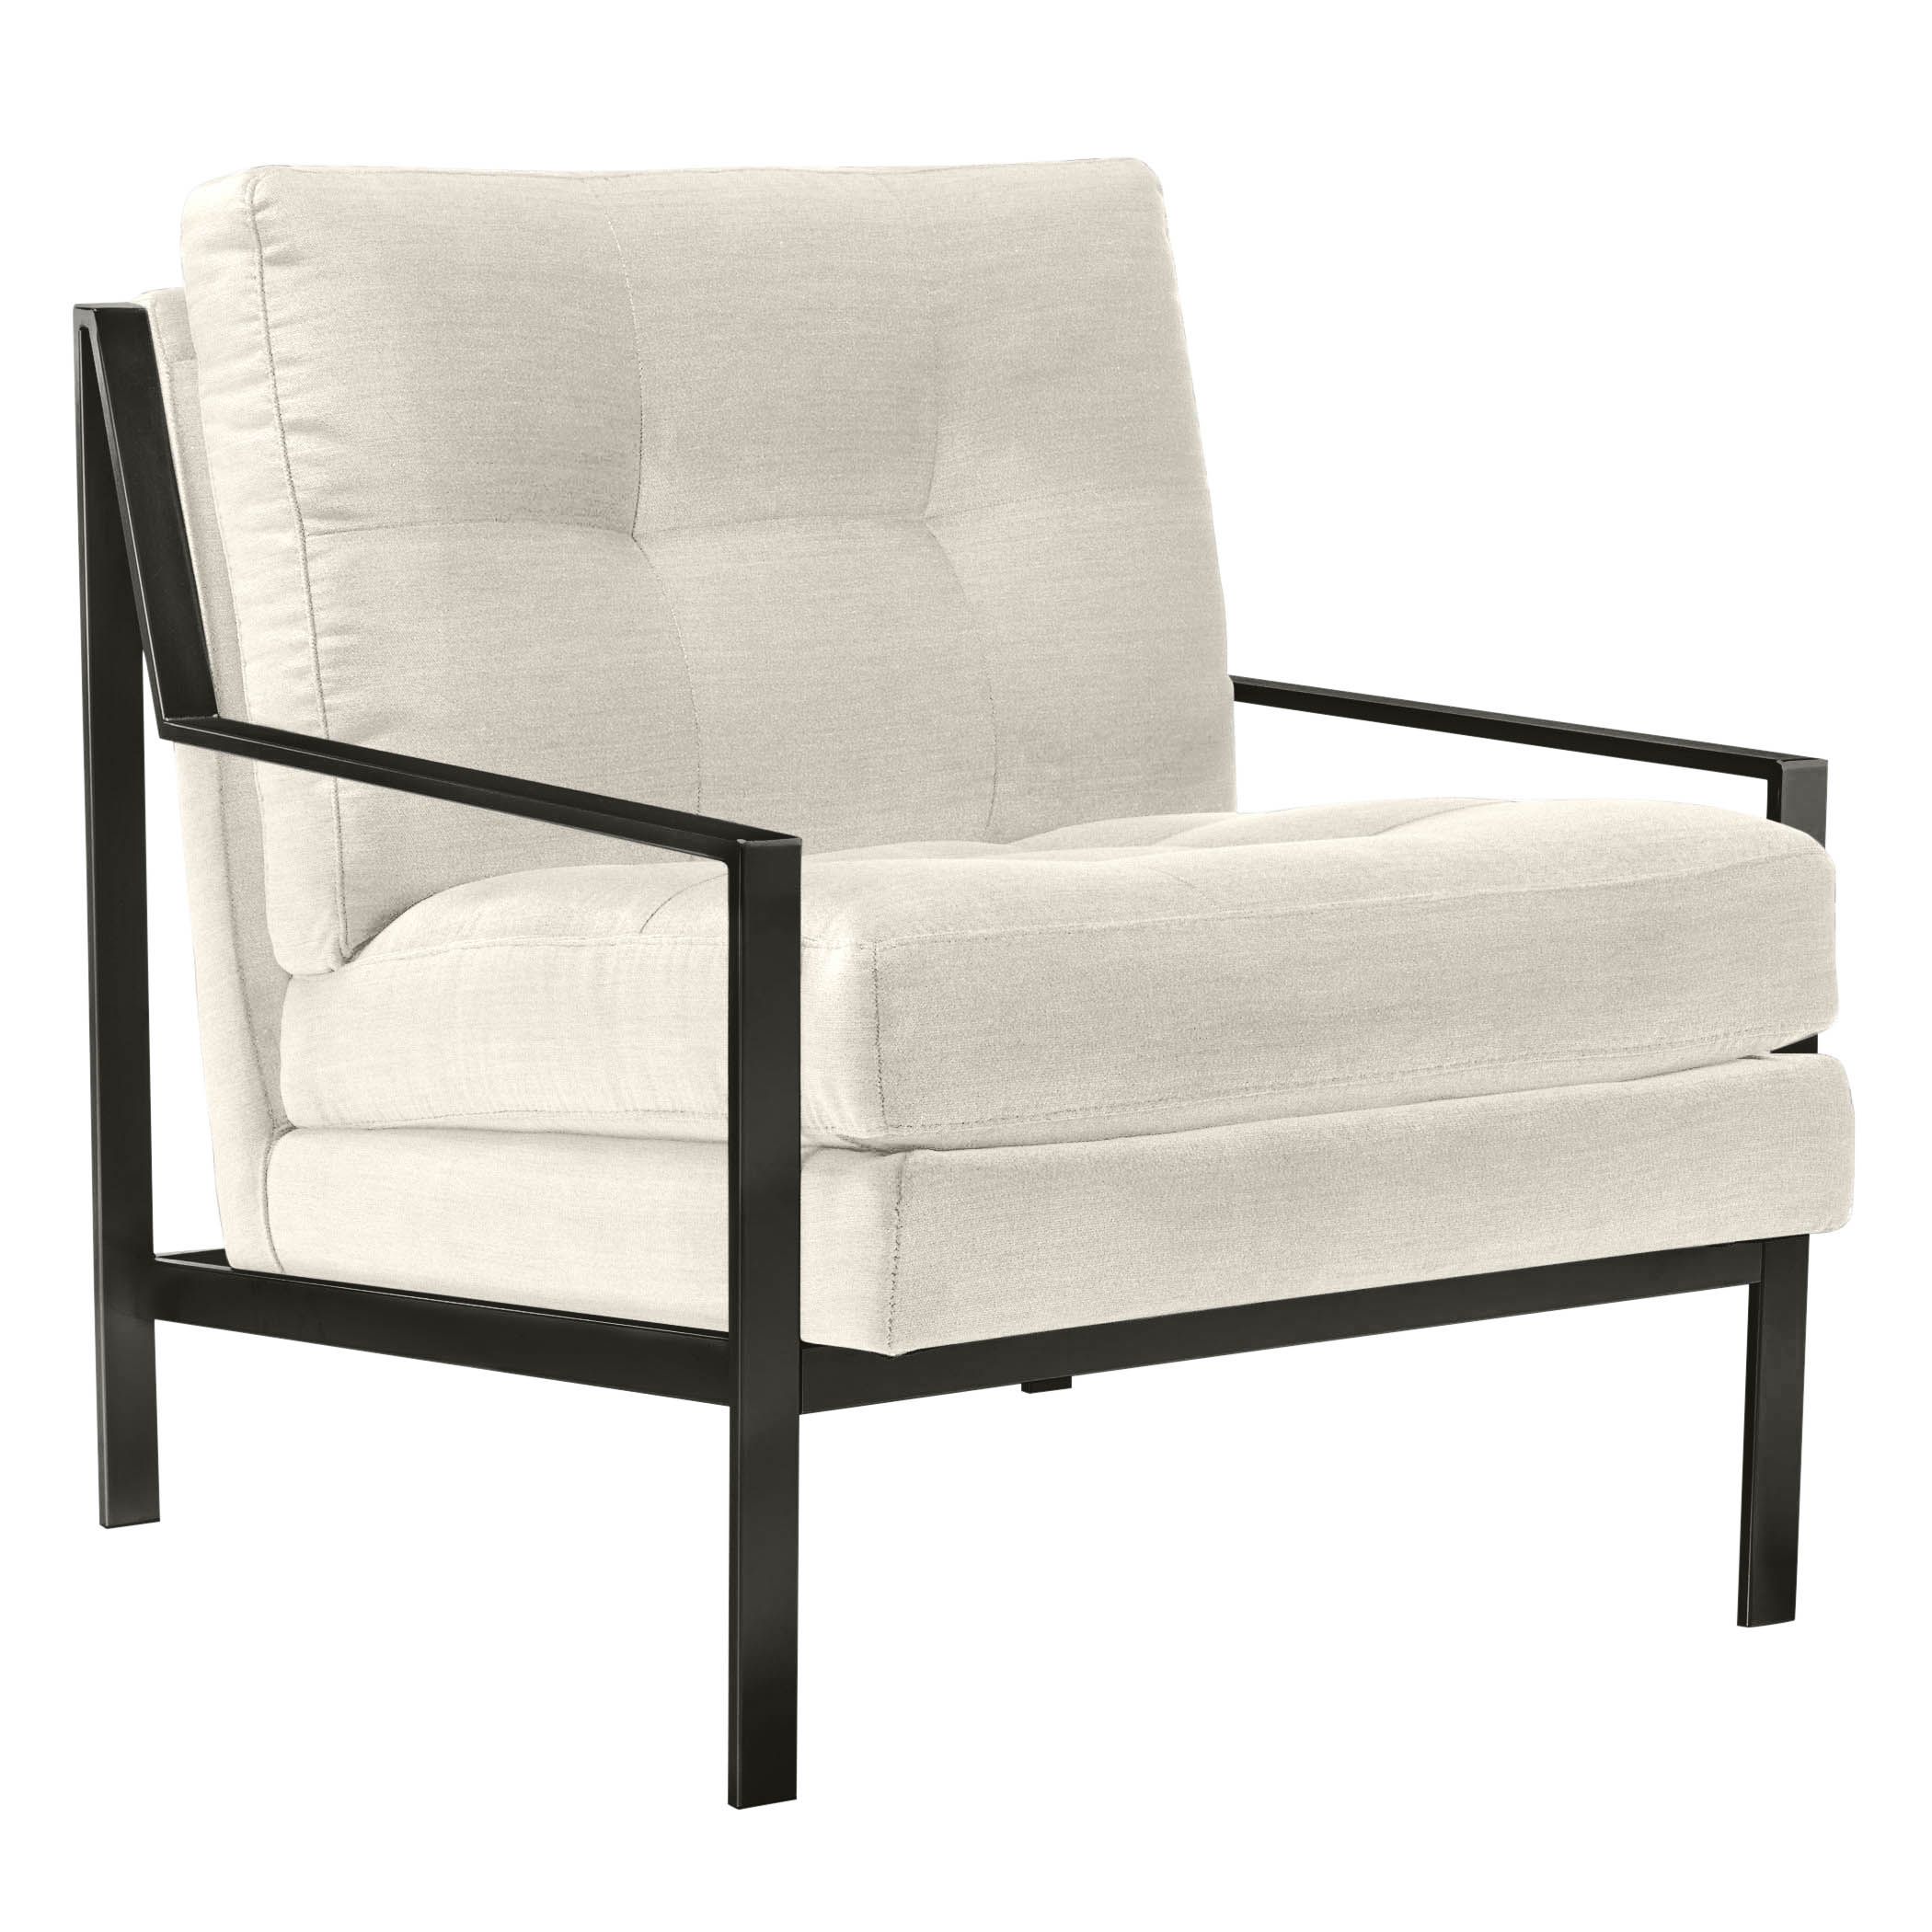 Axel Accent Chair - Black | Z Gallerie